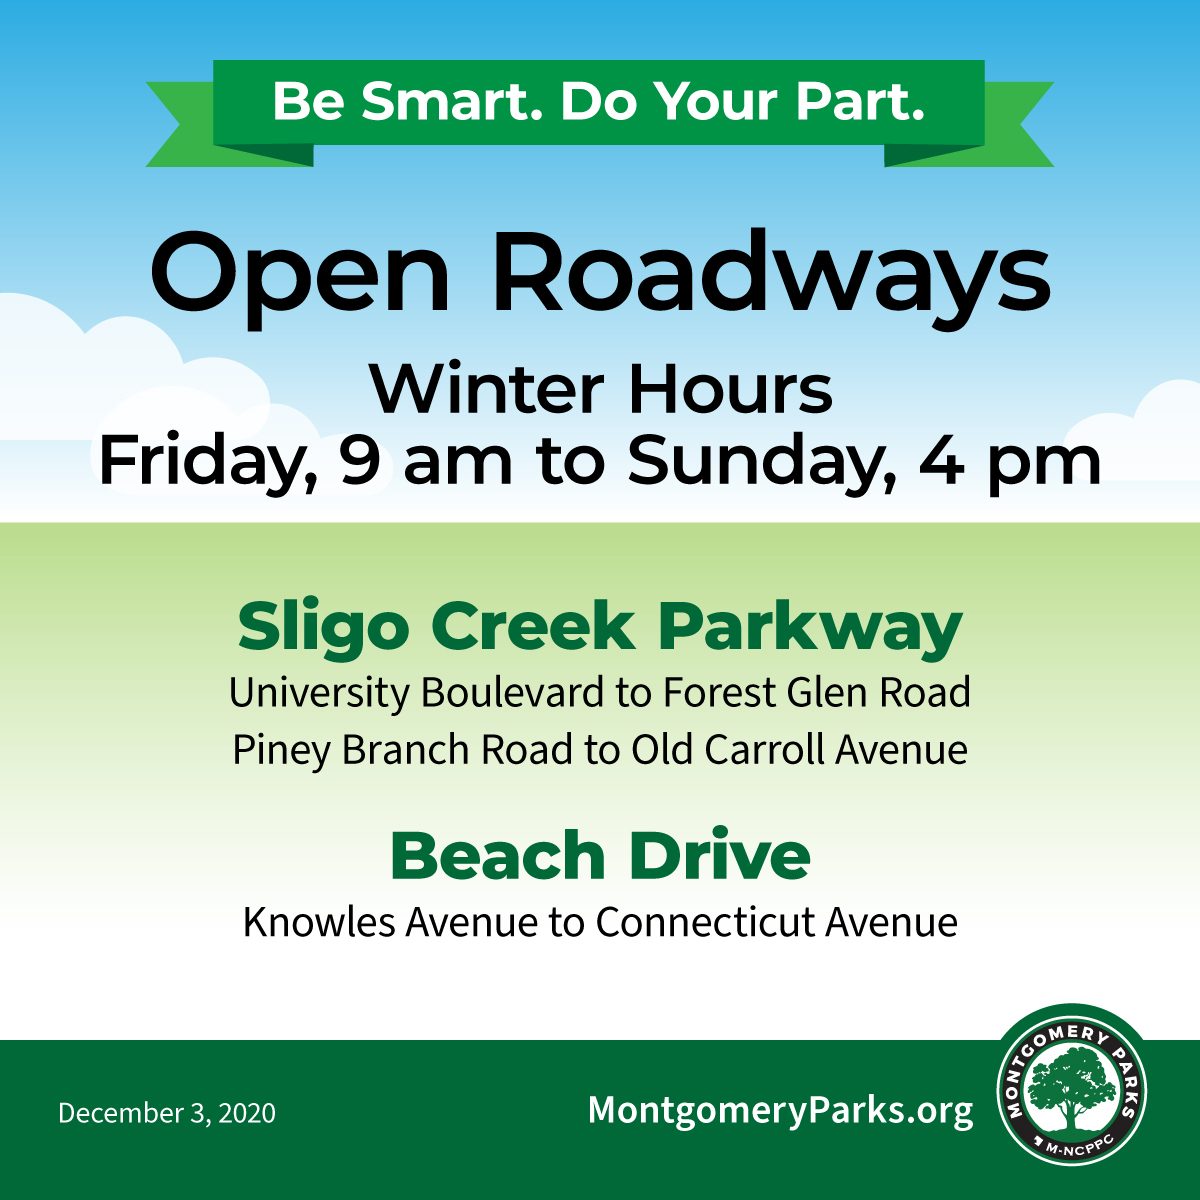 Open Roadways Winter Hours Graphic - Friday 9a to Sunday 4pm. Sligo Creek Parkway and Beach Drive.